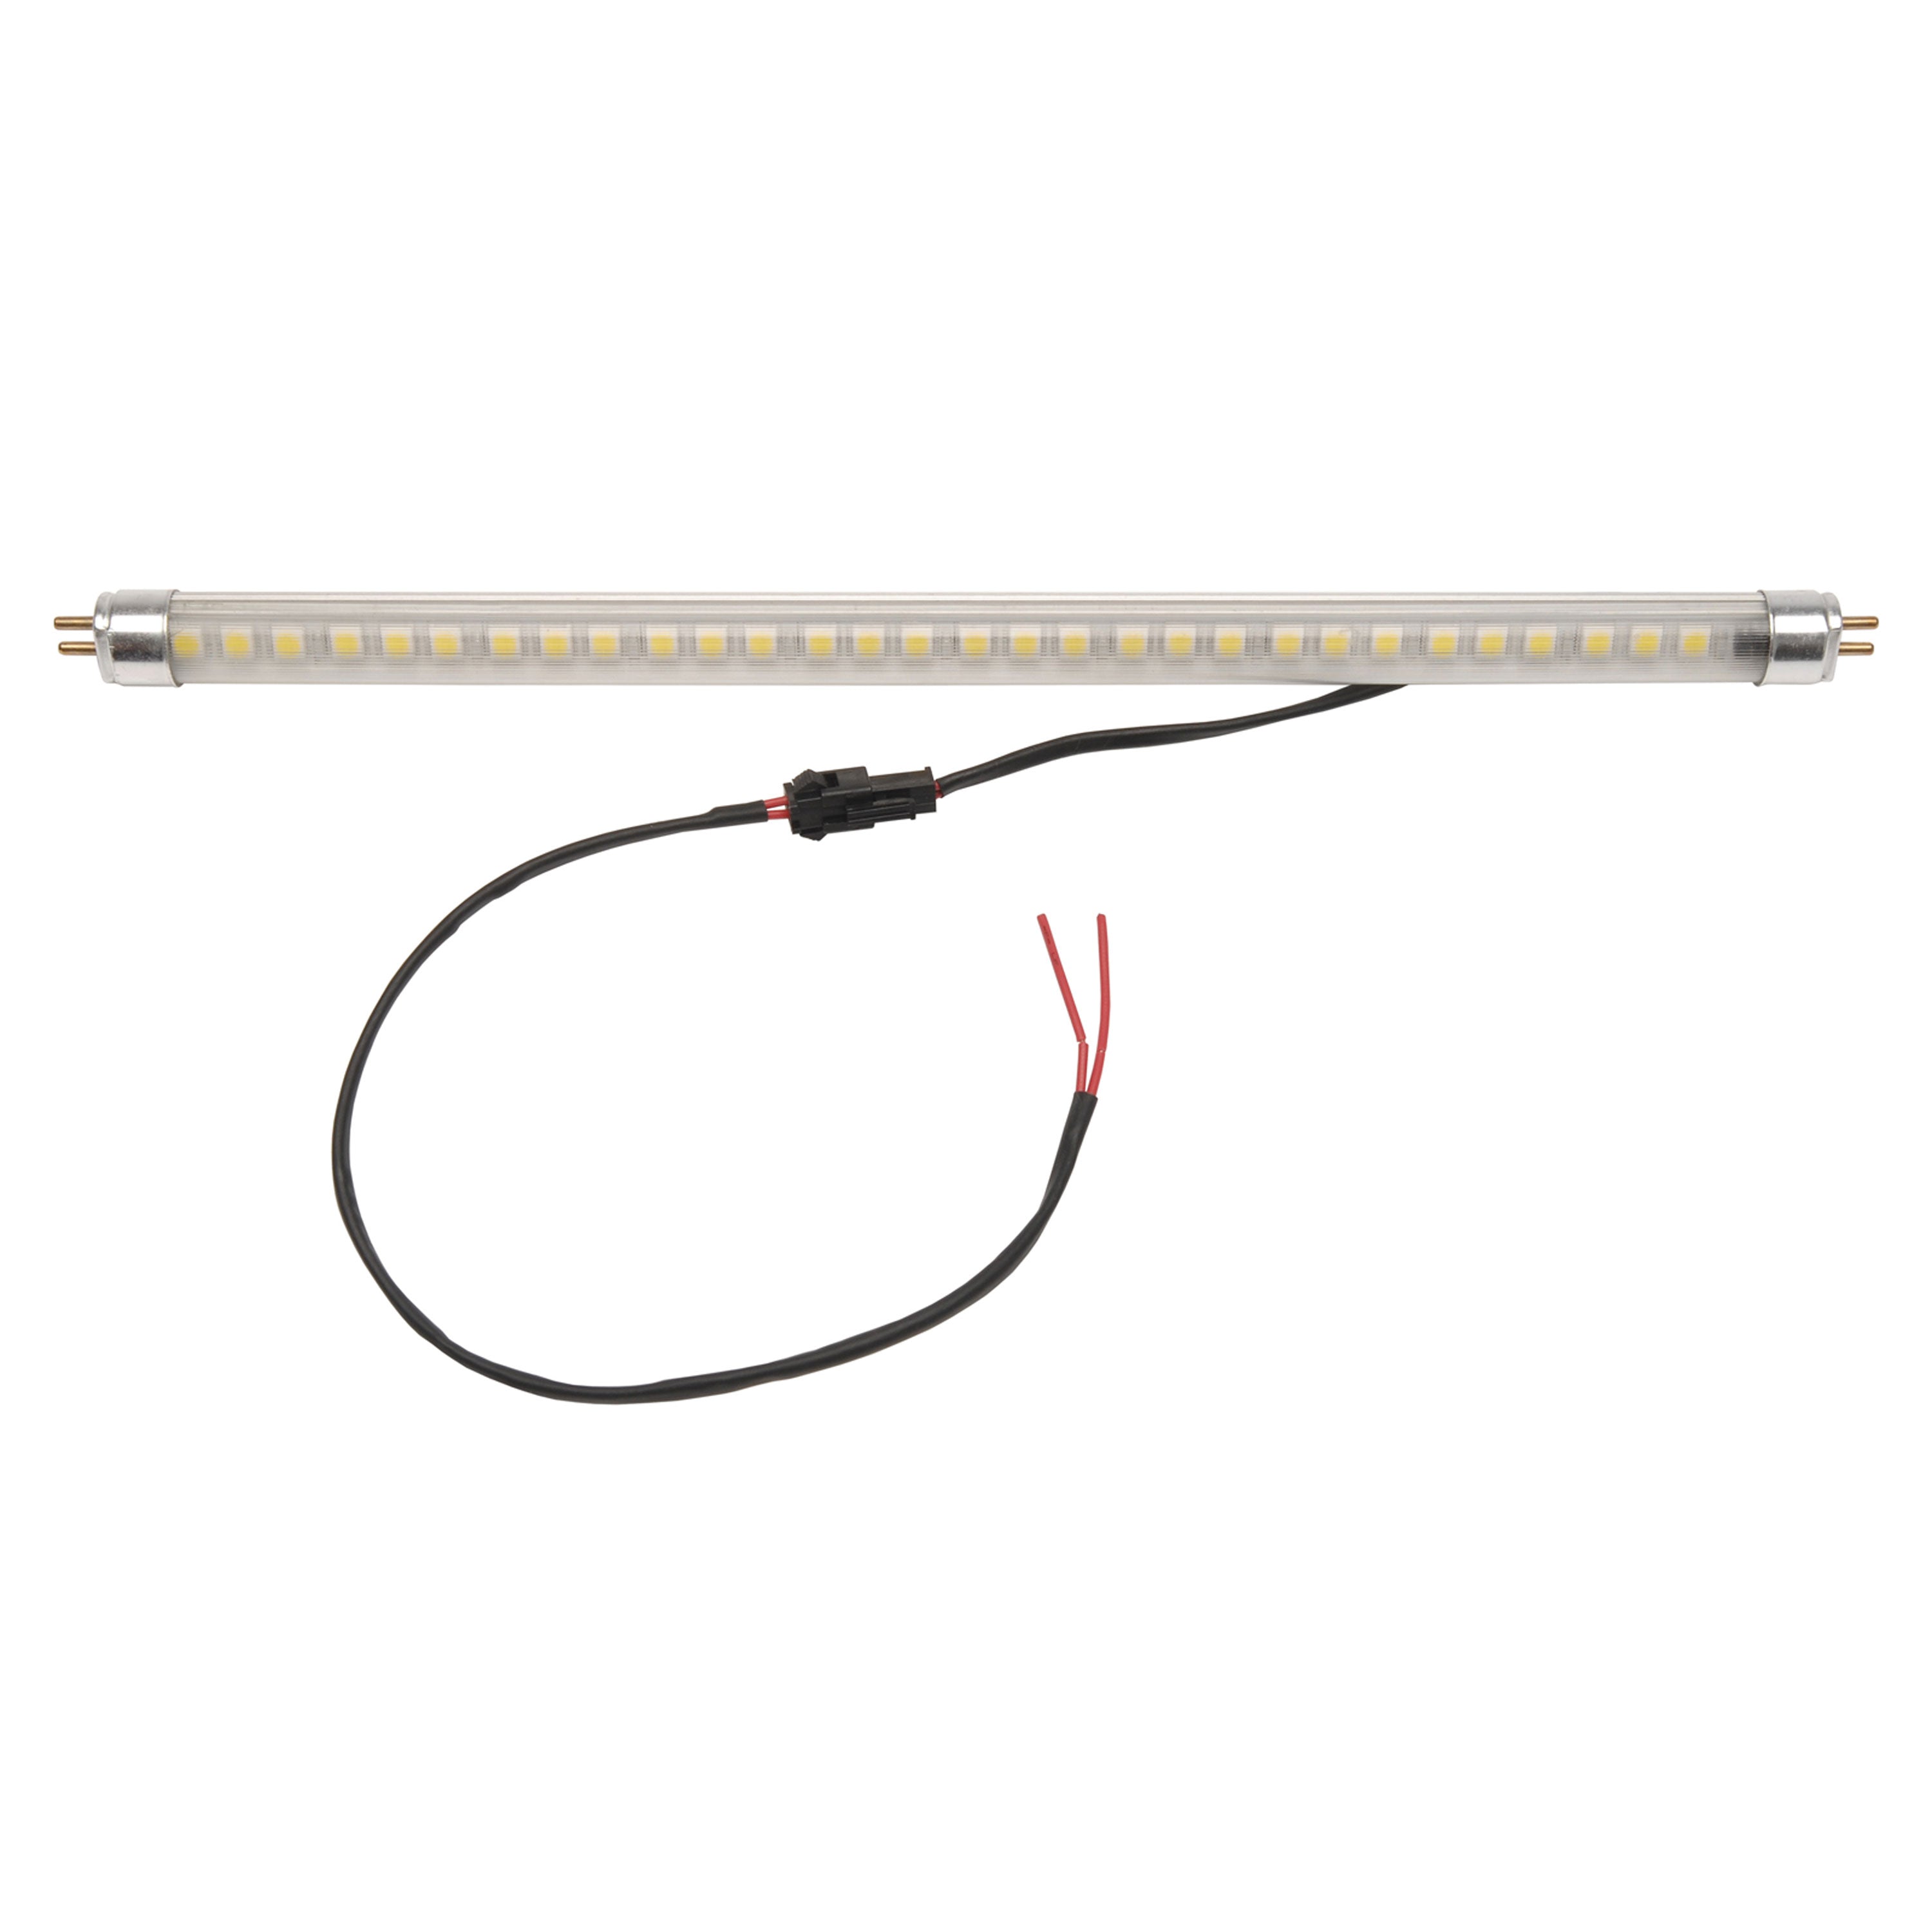 AP Products 016-T5-12 Star Lights LED Replacement for Fluorescent Tube - 12"